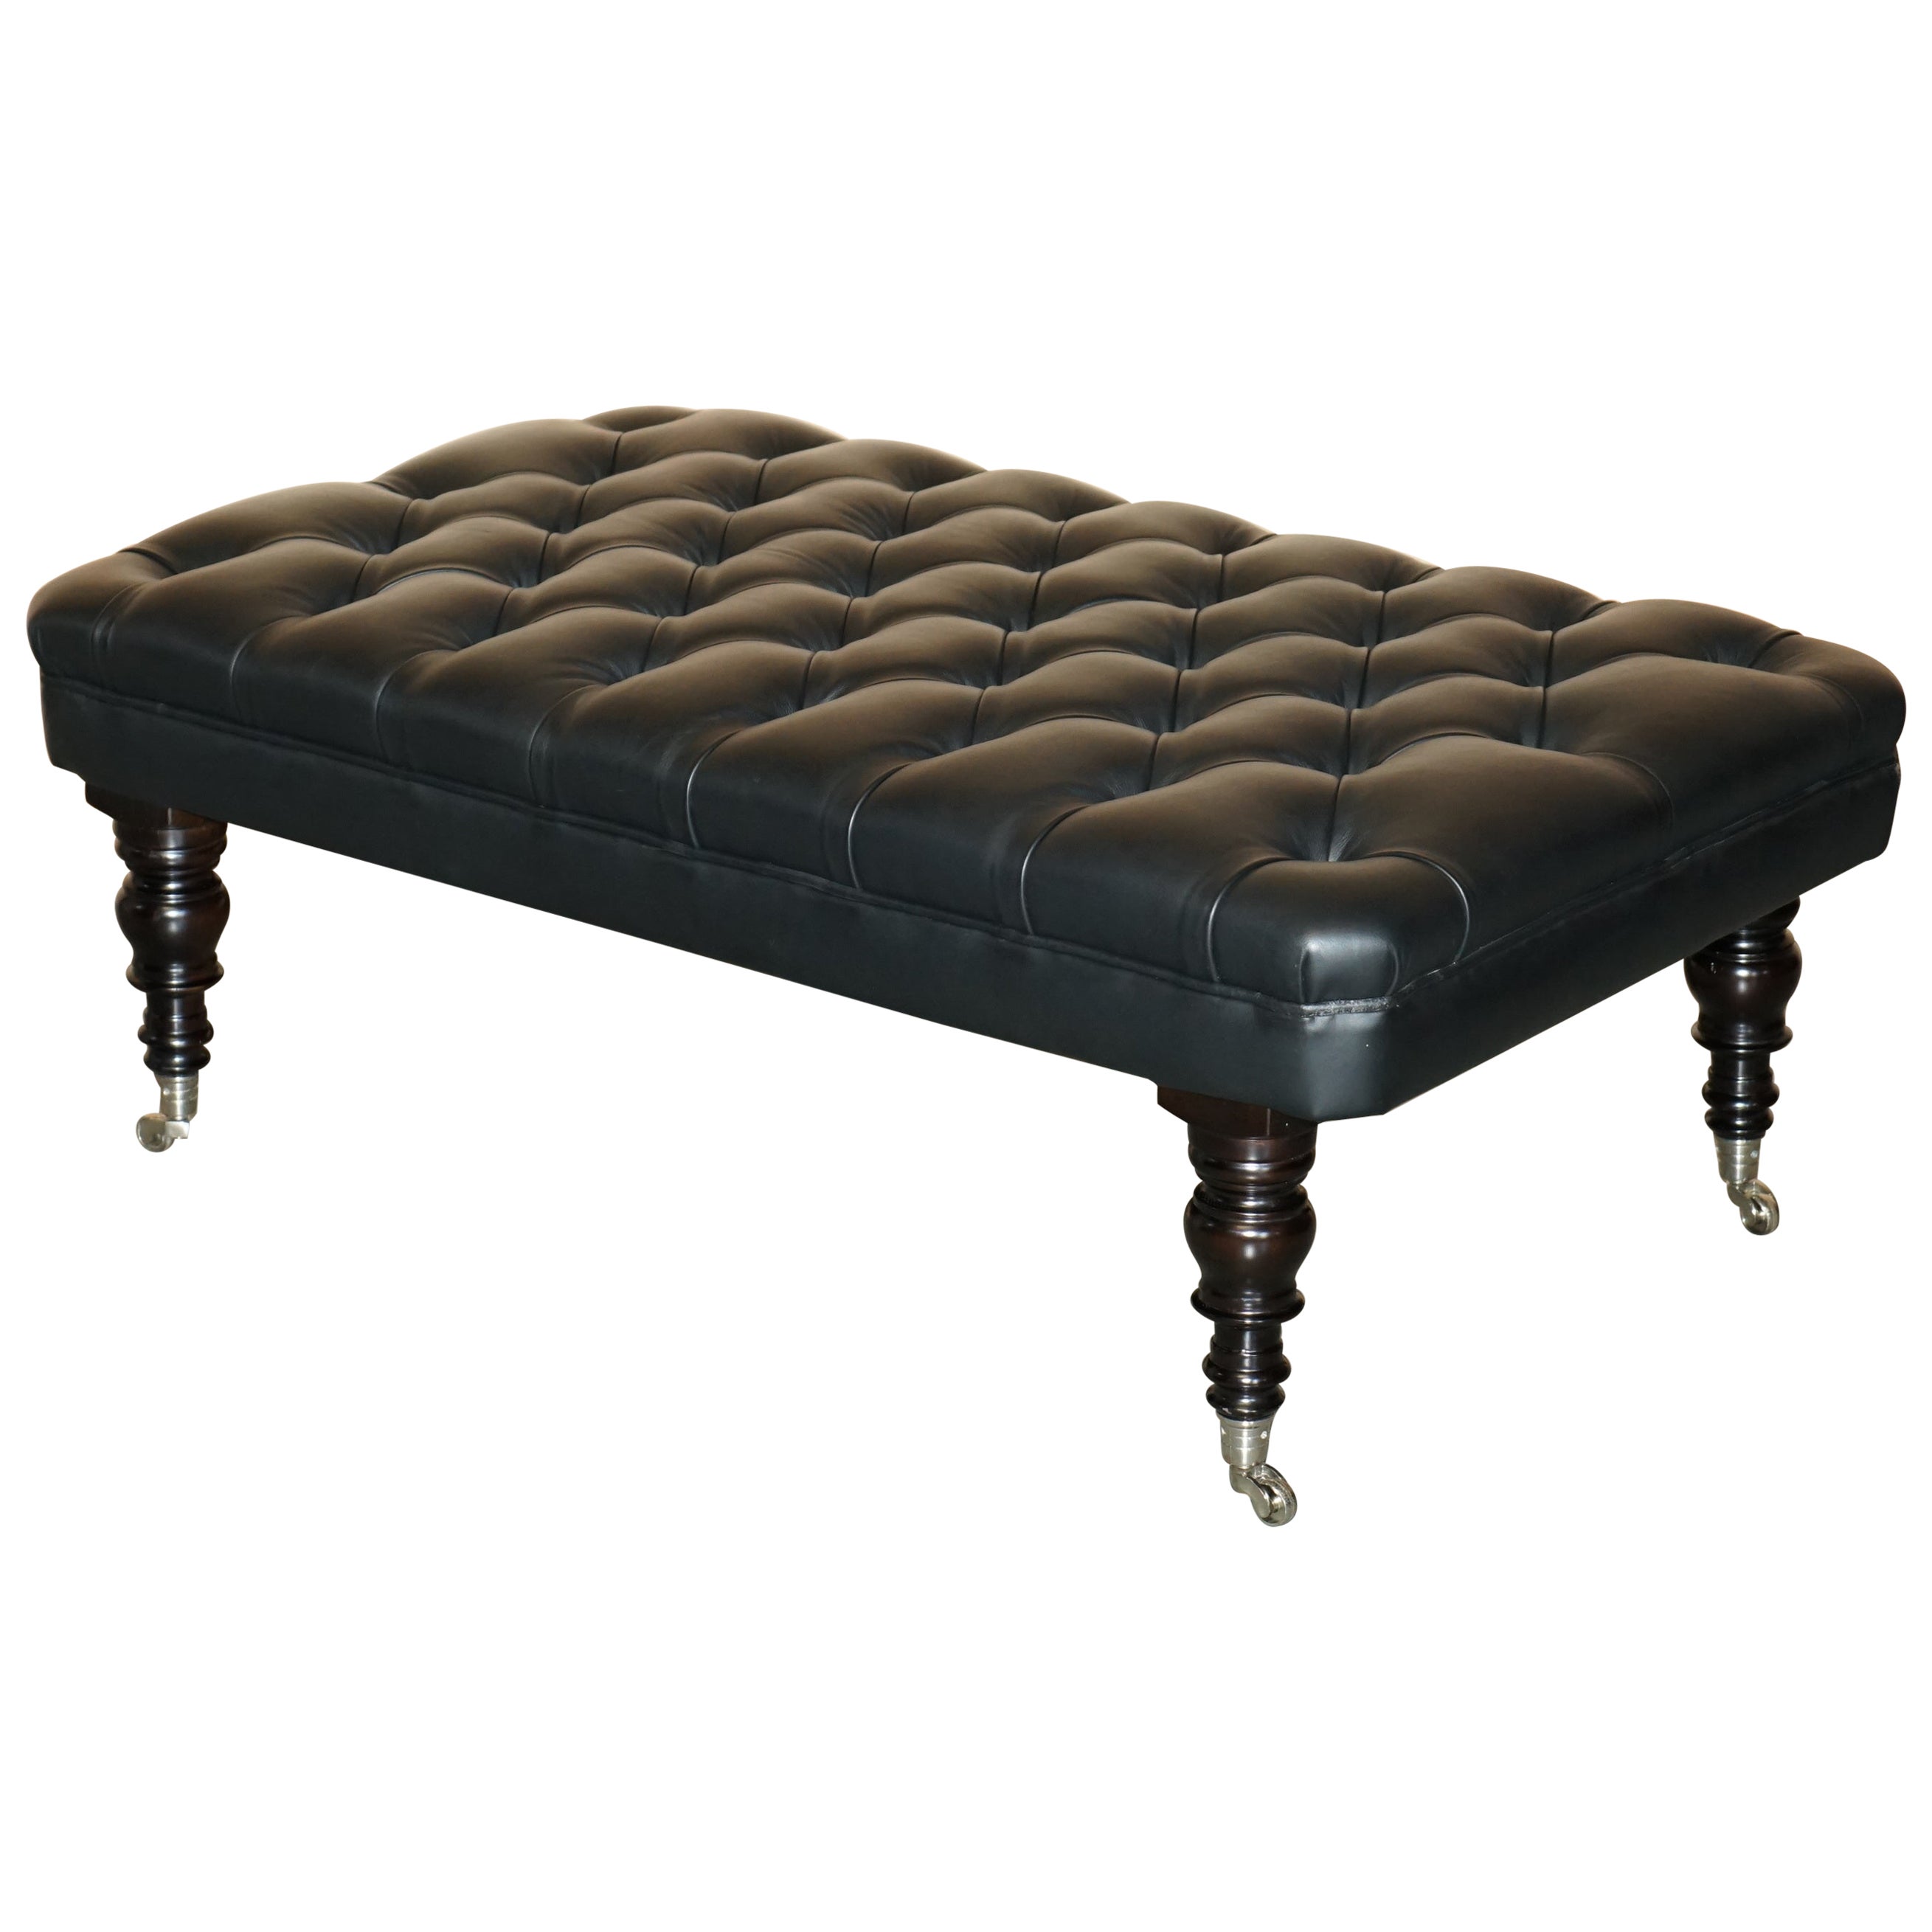 1 von 2 GEORGE SMITH EXTRA LARGE CHESTERFiELD BLACK LEATHER TUFTED FOOTSTOOLS